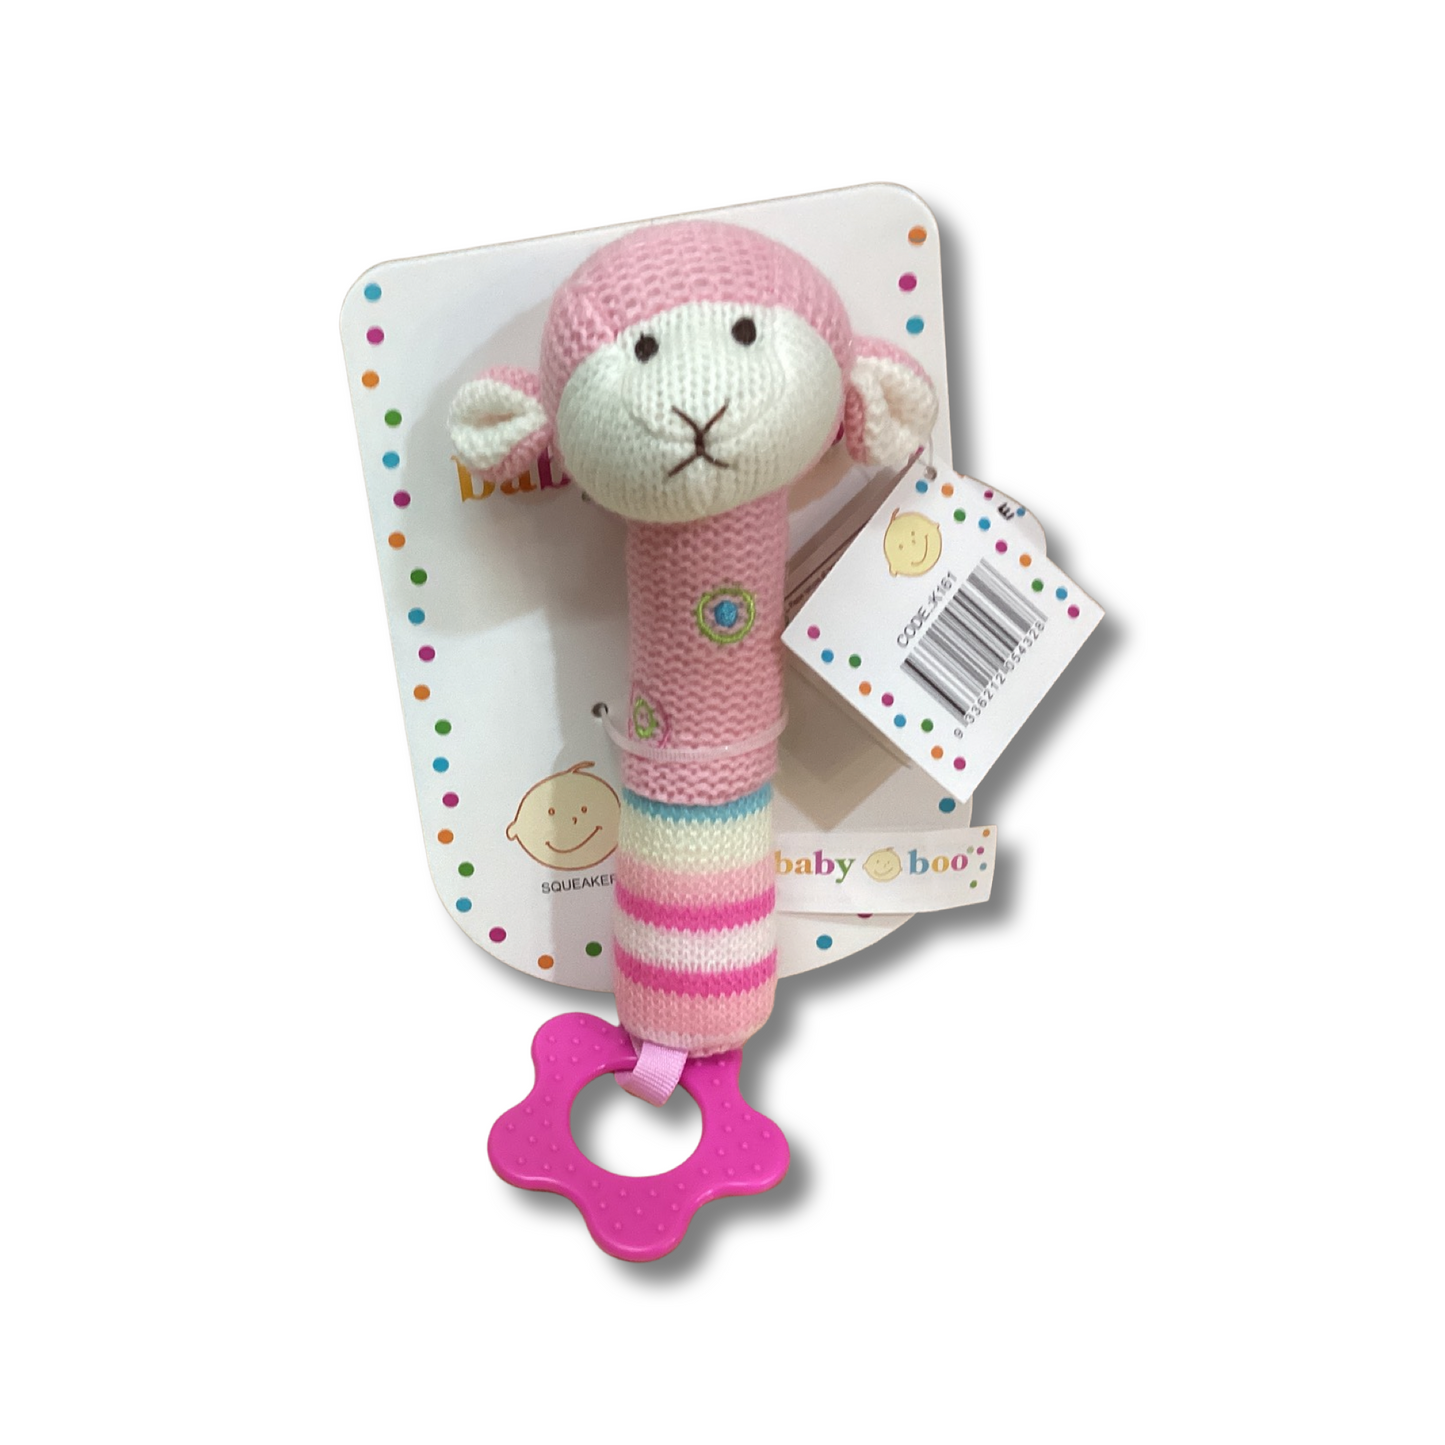 Pink Lamb Squeaker Toy Baby Boo